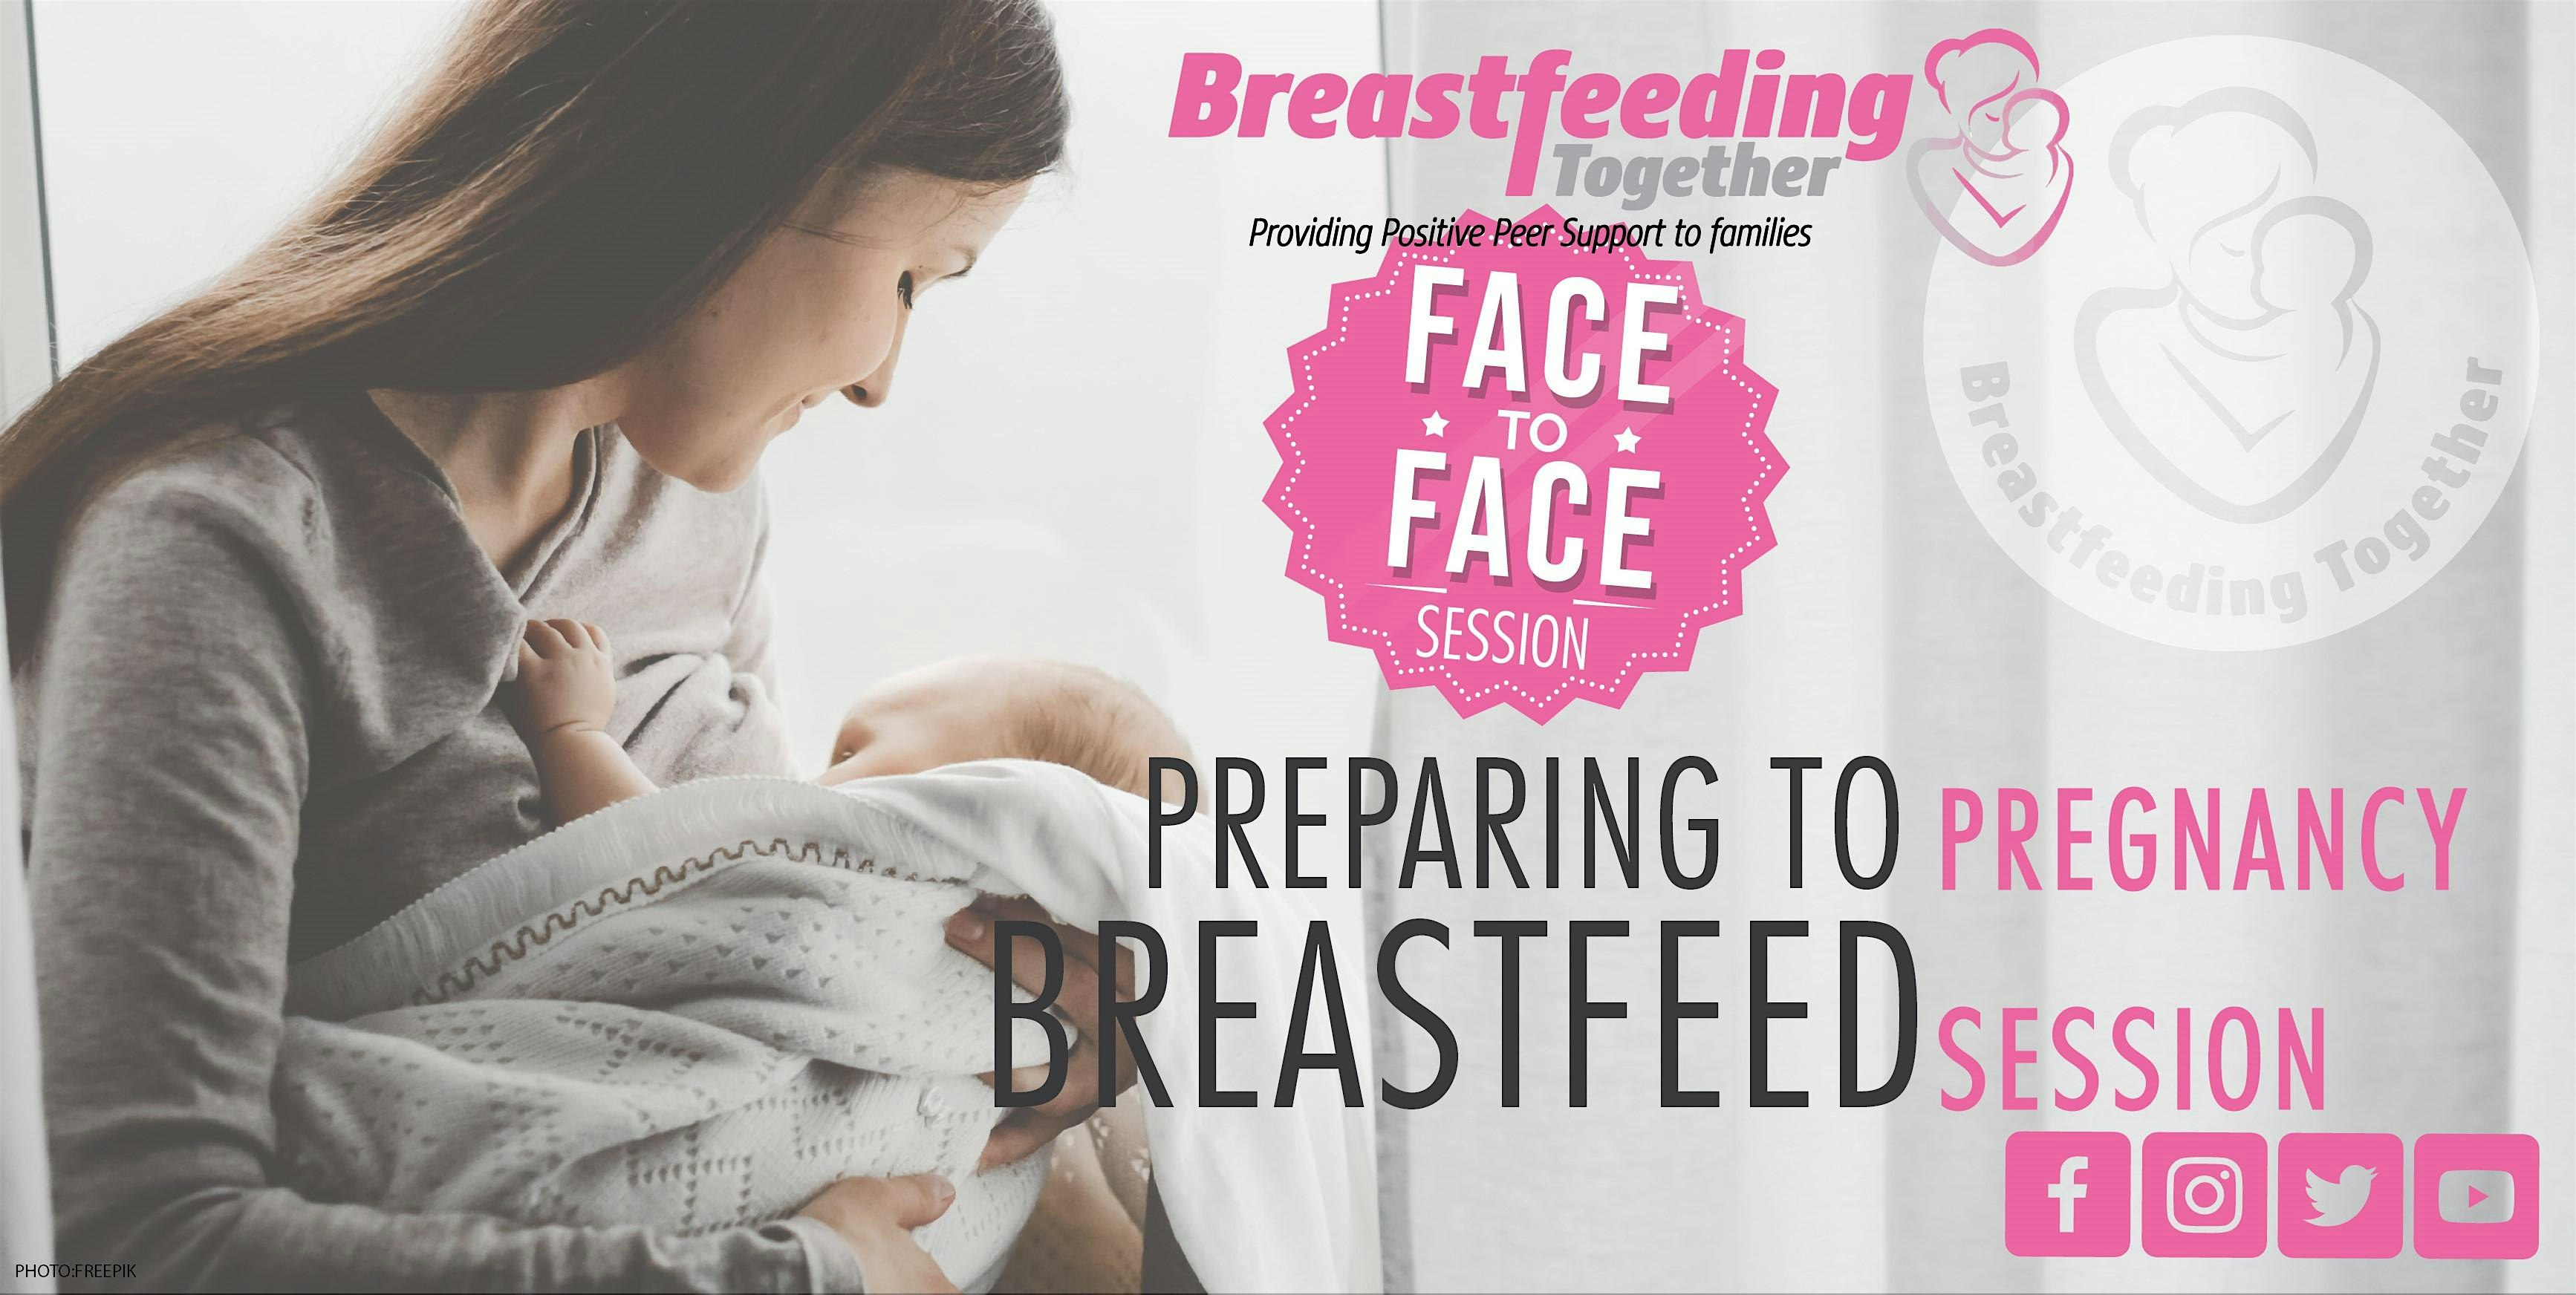 Preparing To Breastfeed - Face to Face Session